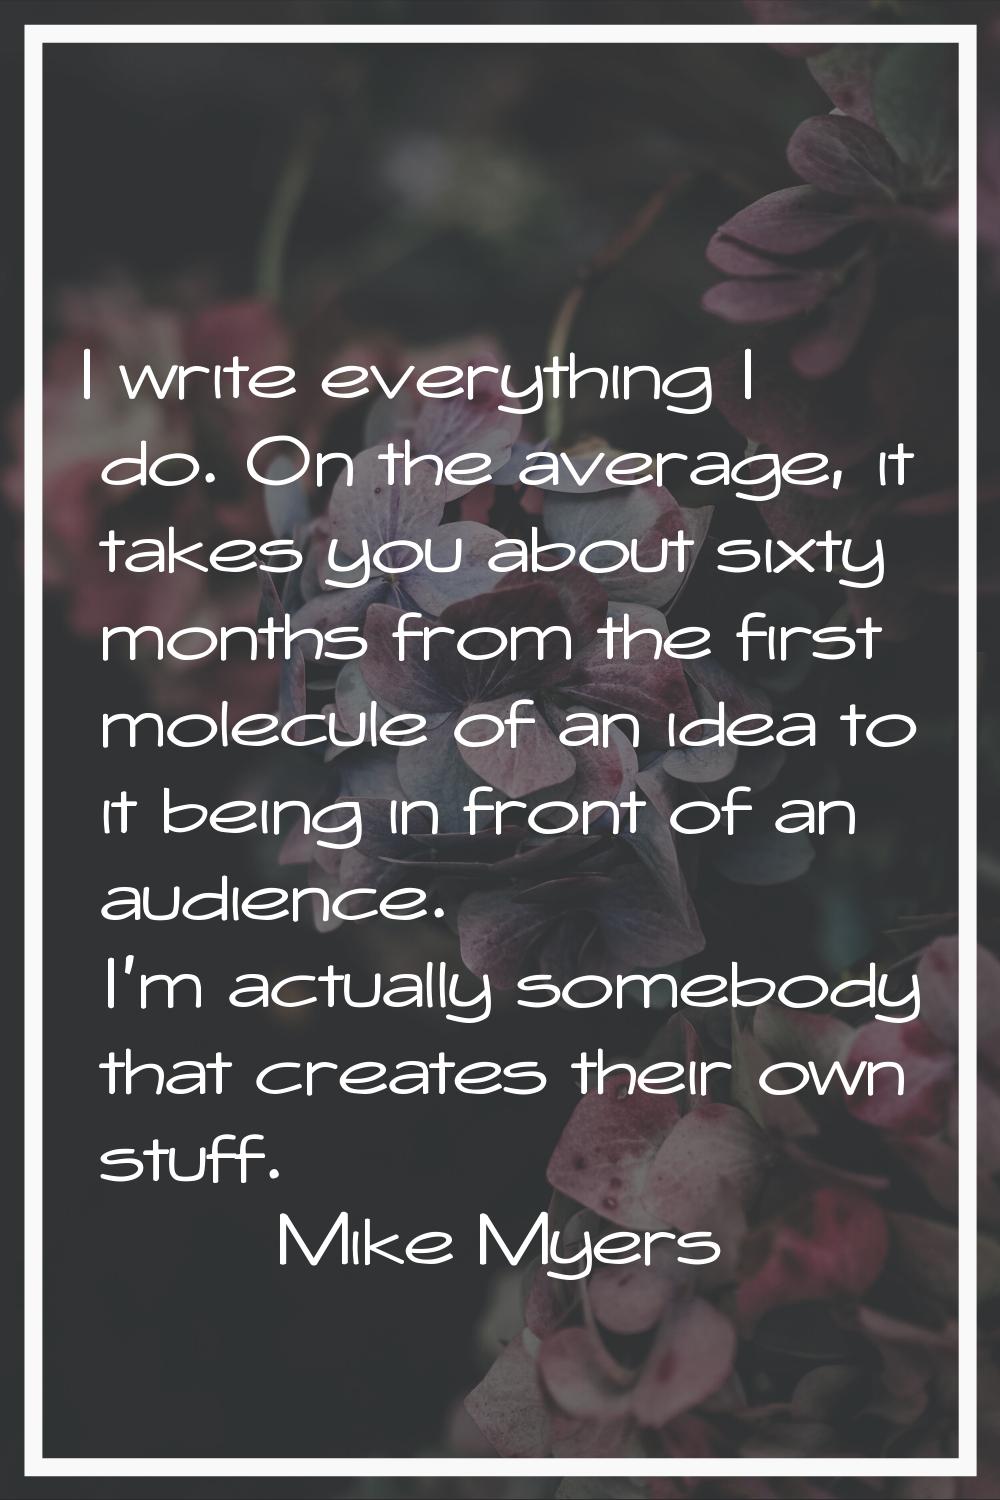 I write everything I do. On the average, it takes you about sixty months from the first molecule of